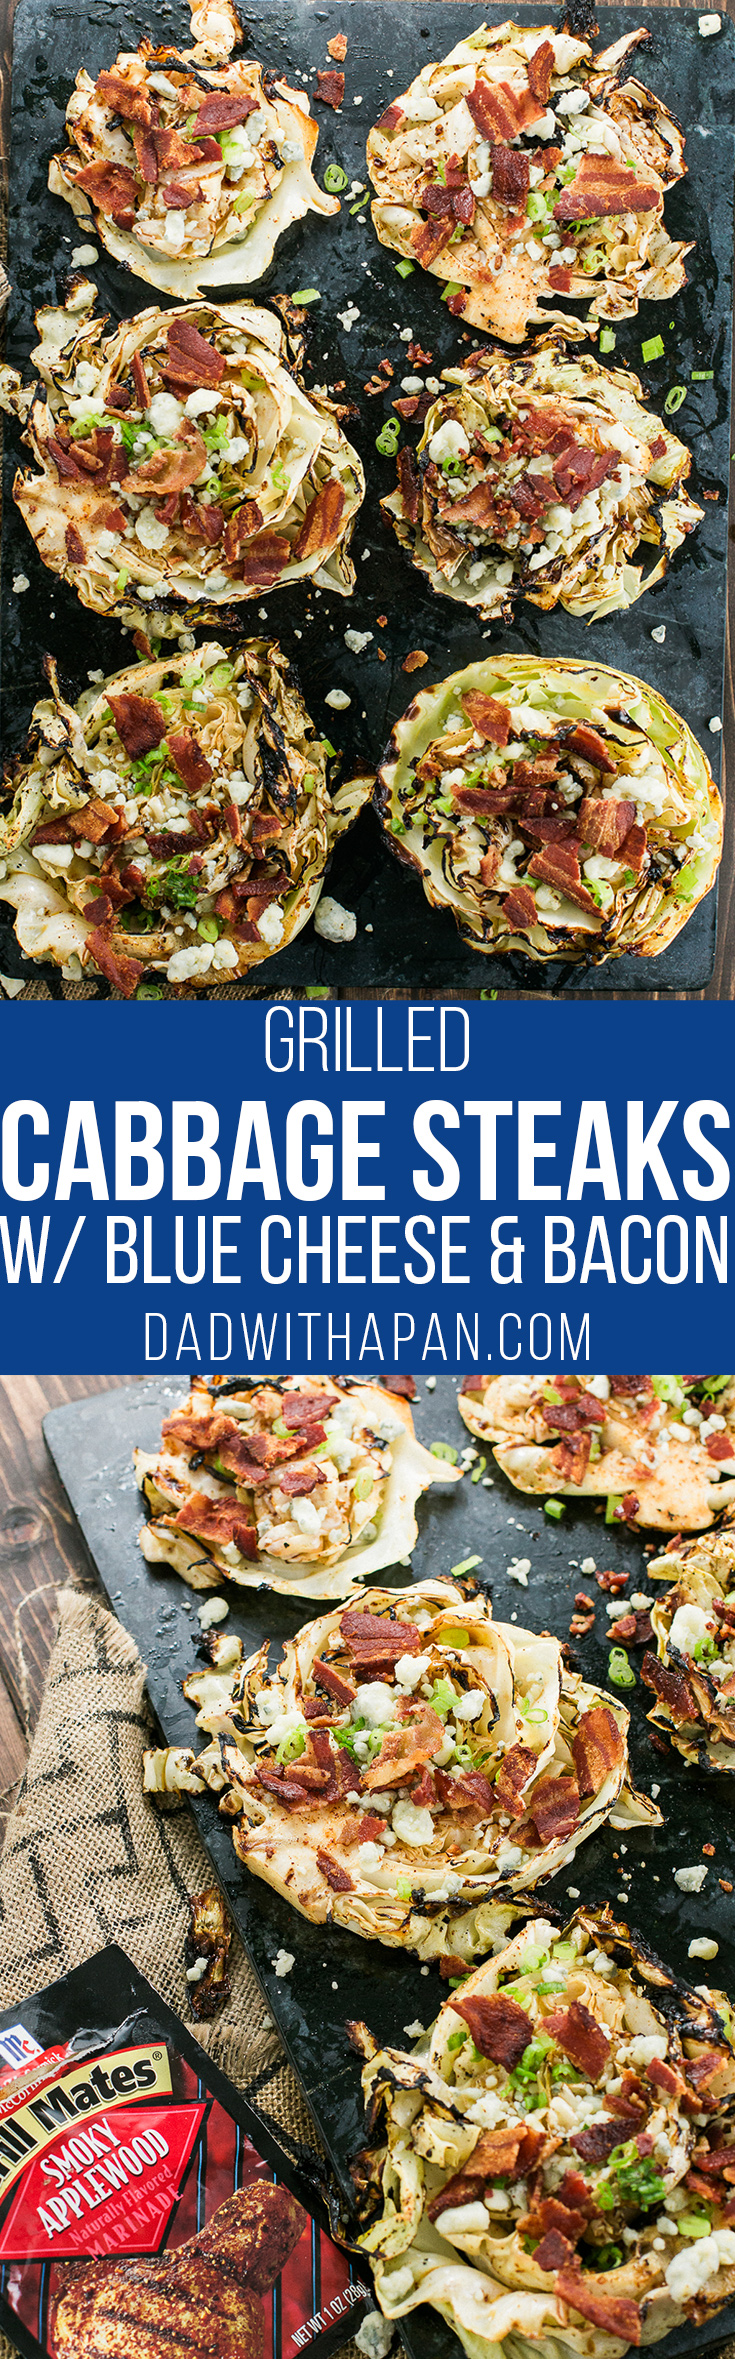 Grilled Cabbage Steaks Marinated With McCormick Grill Mates Smoky Applewood seasoning, topped with Bacon, Blue Cheese, and Green onions!